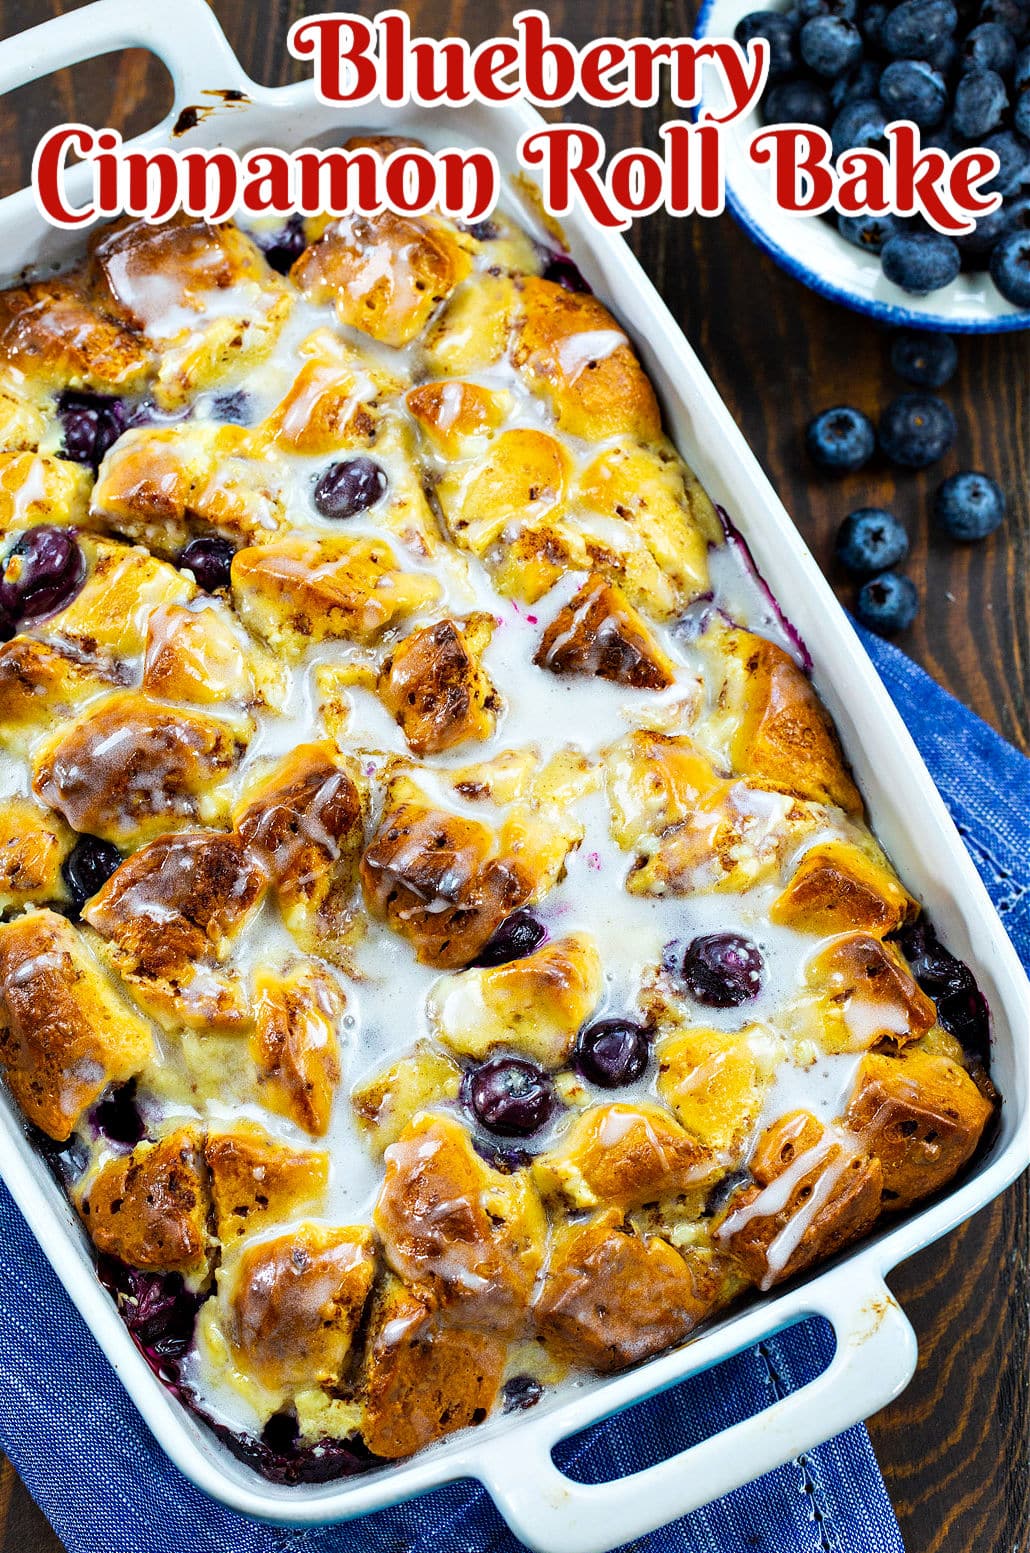 Blueberry Cinnamon Roll Bake in a baking dish.